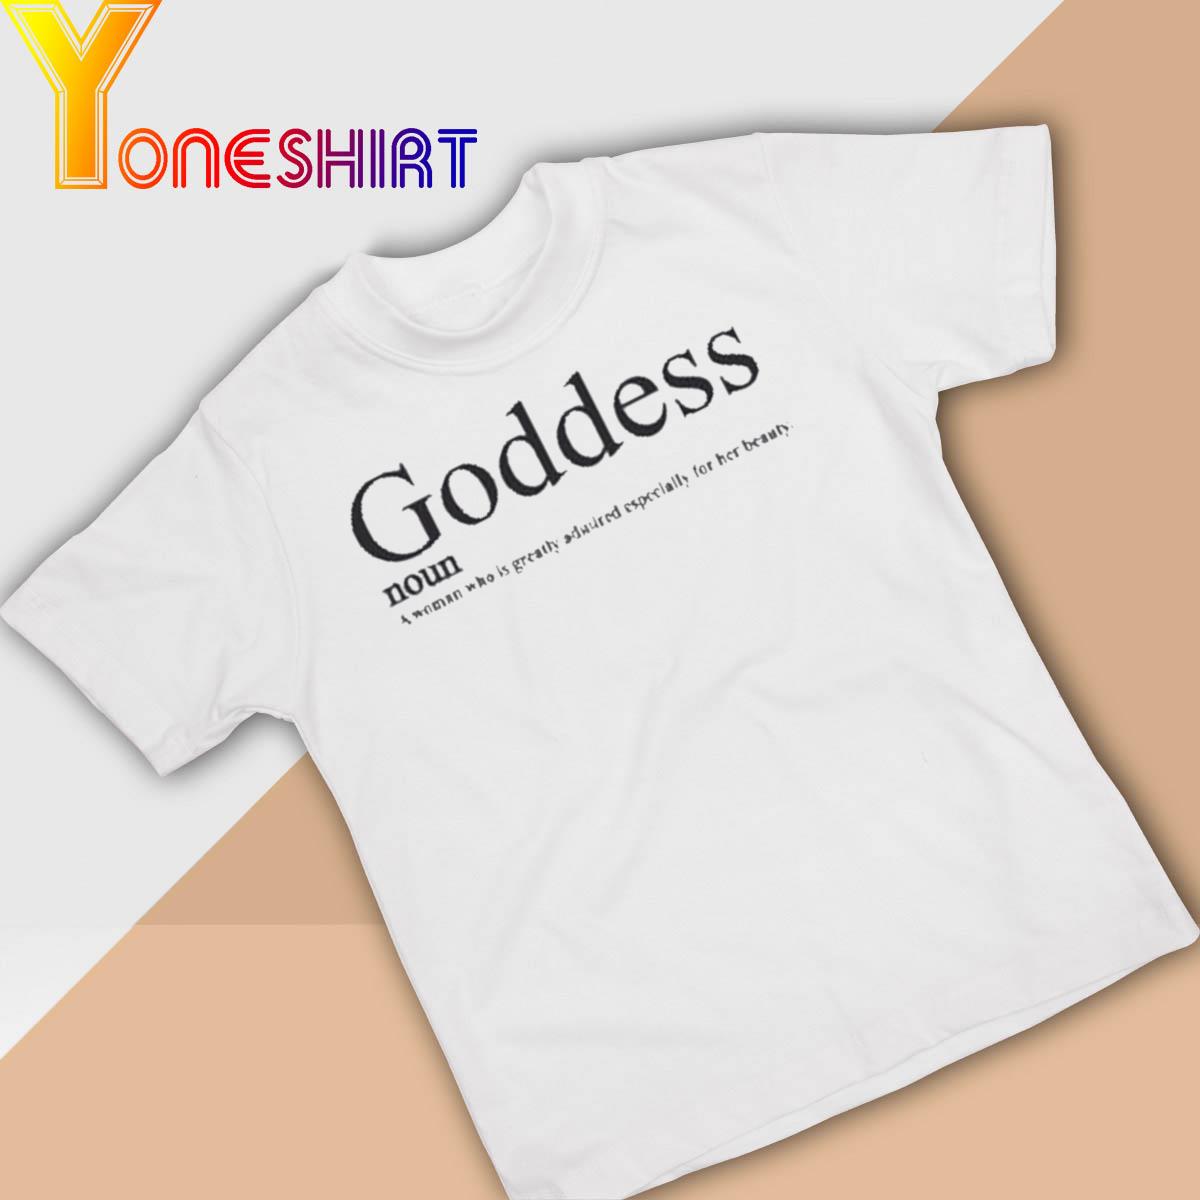 Neiva Mara Wearing Goddess Noun A Woman Who Is Greatly Admired Especially For Her Beauty Shirt